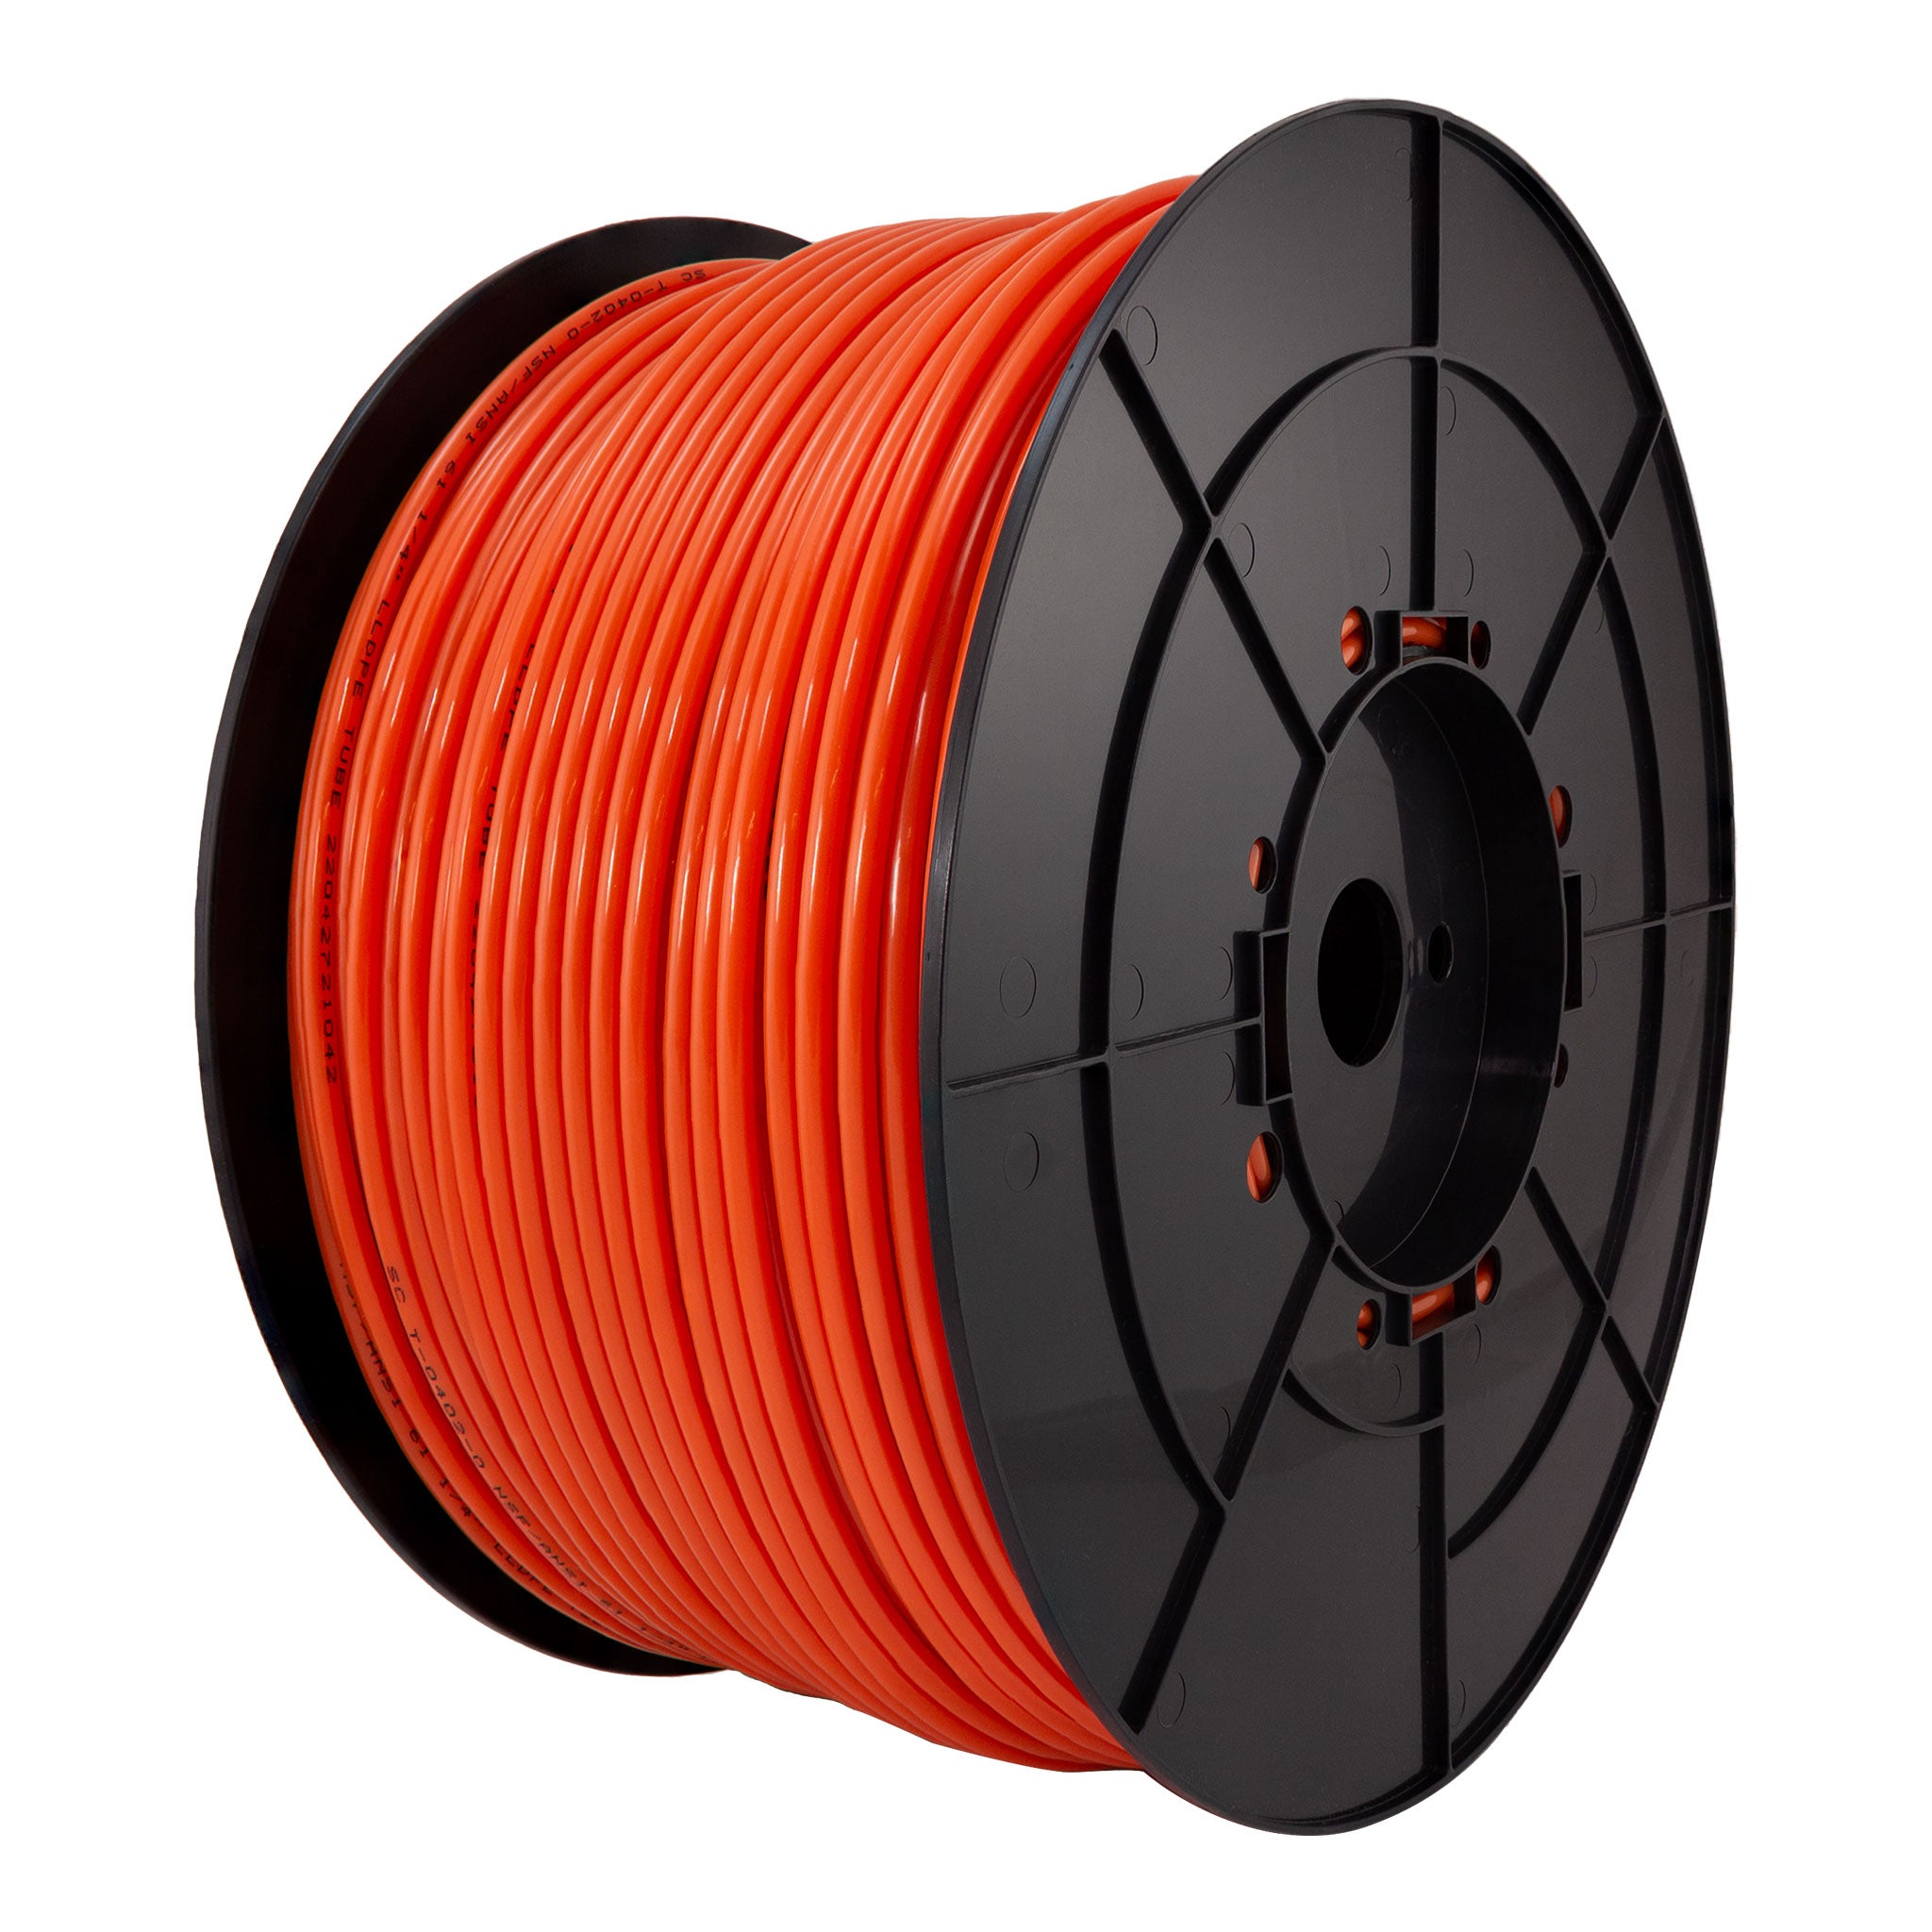 1/4" LLDPE Tube. 1000 FT or 300 M Roll. With Spool. Orange Color. Certified by NSF.